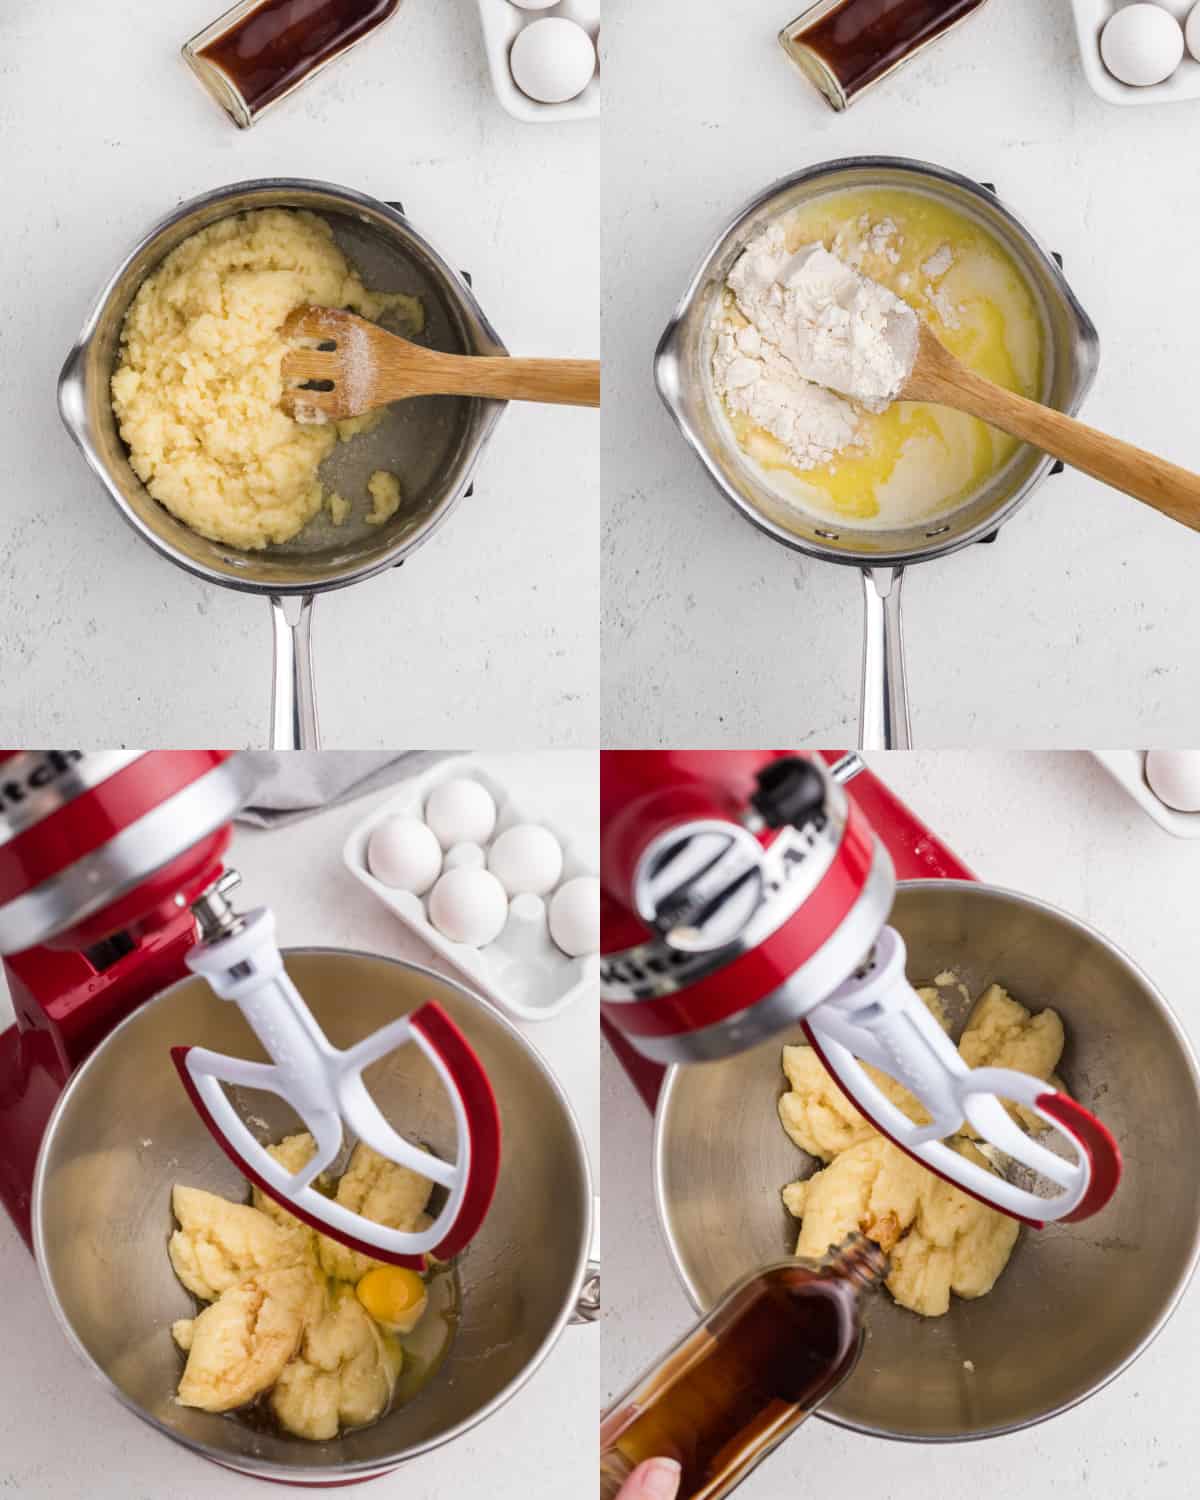 Four photos showing the process of making choux pastry, from mixing the ingredients to the dough forming.